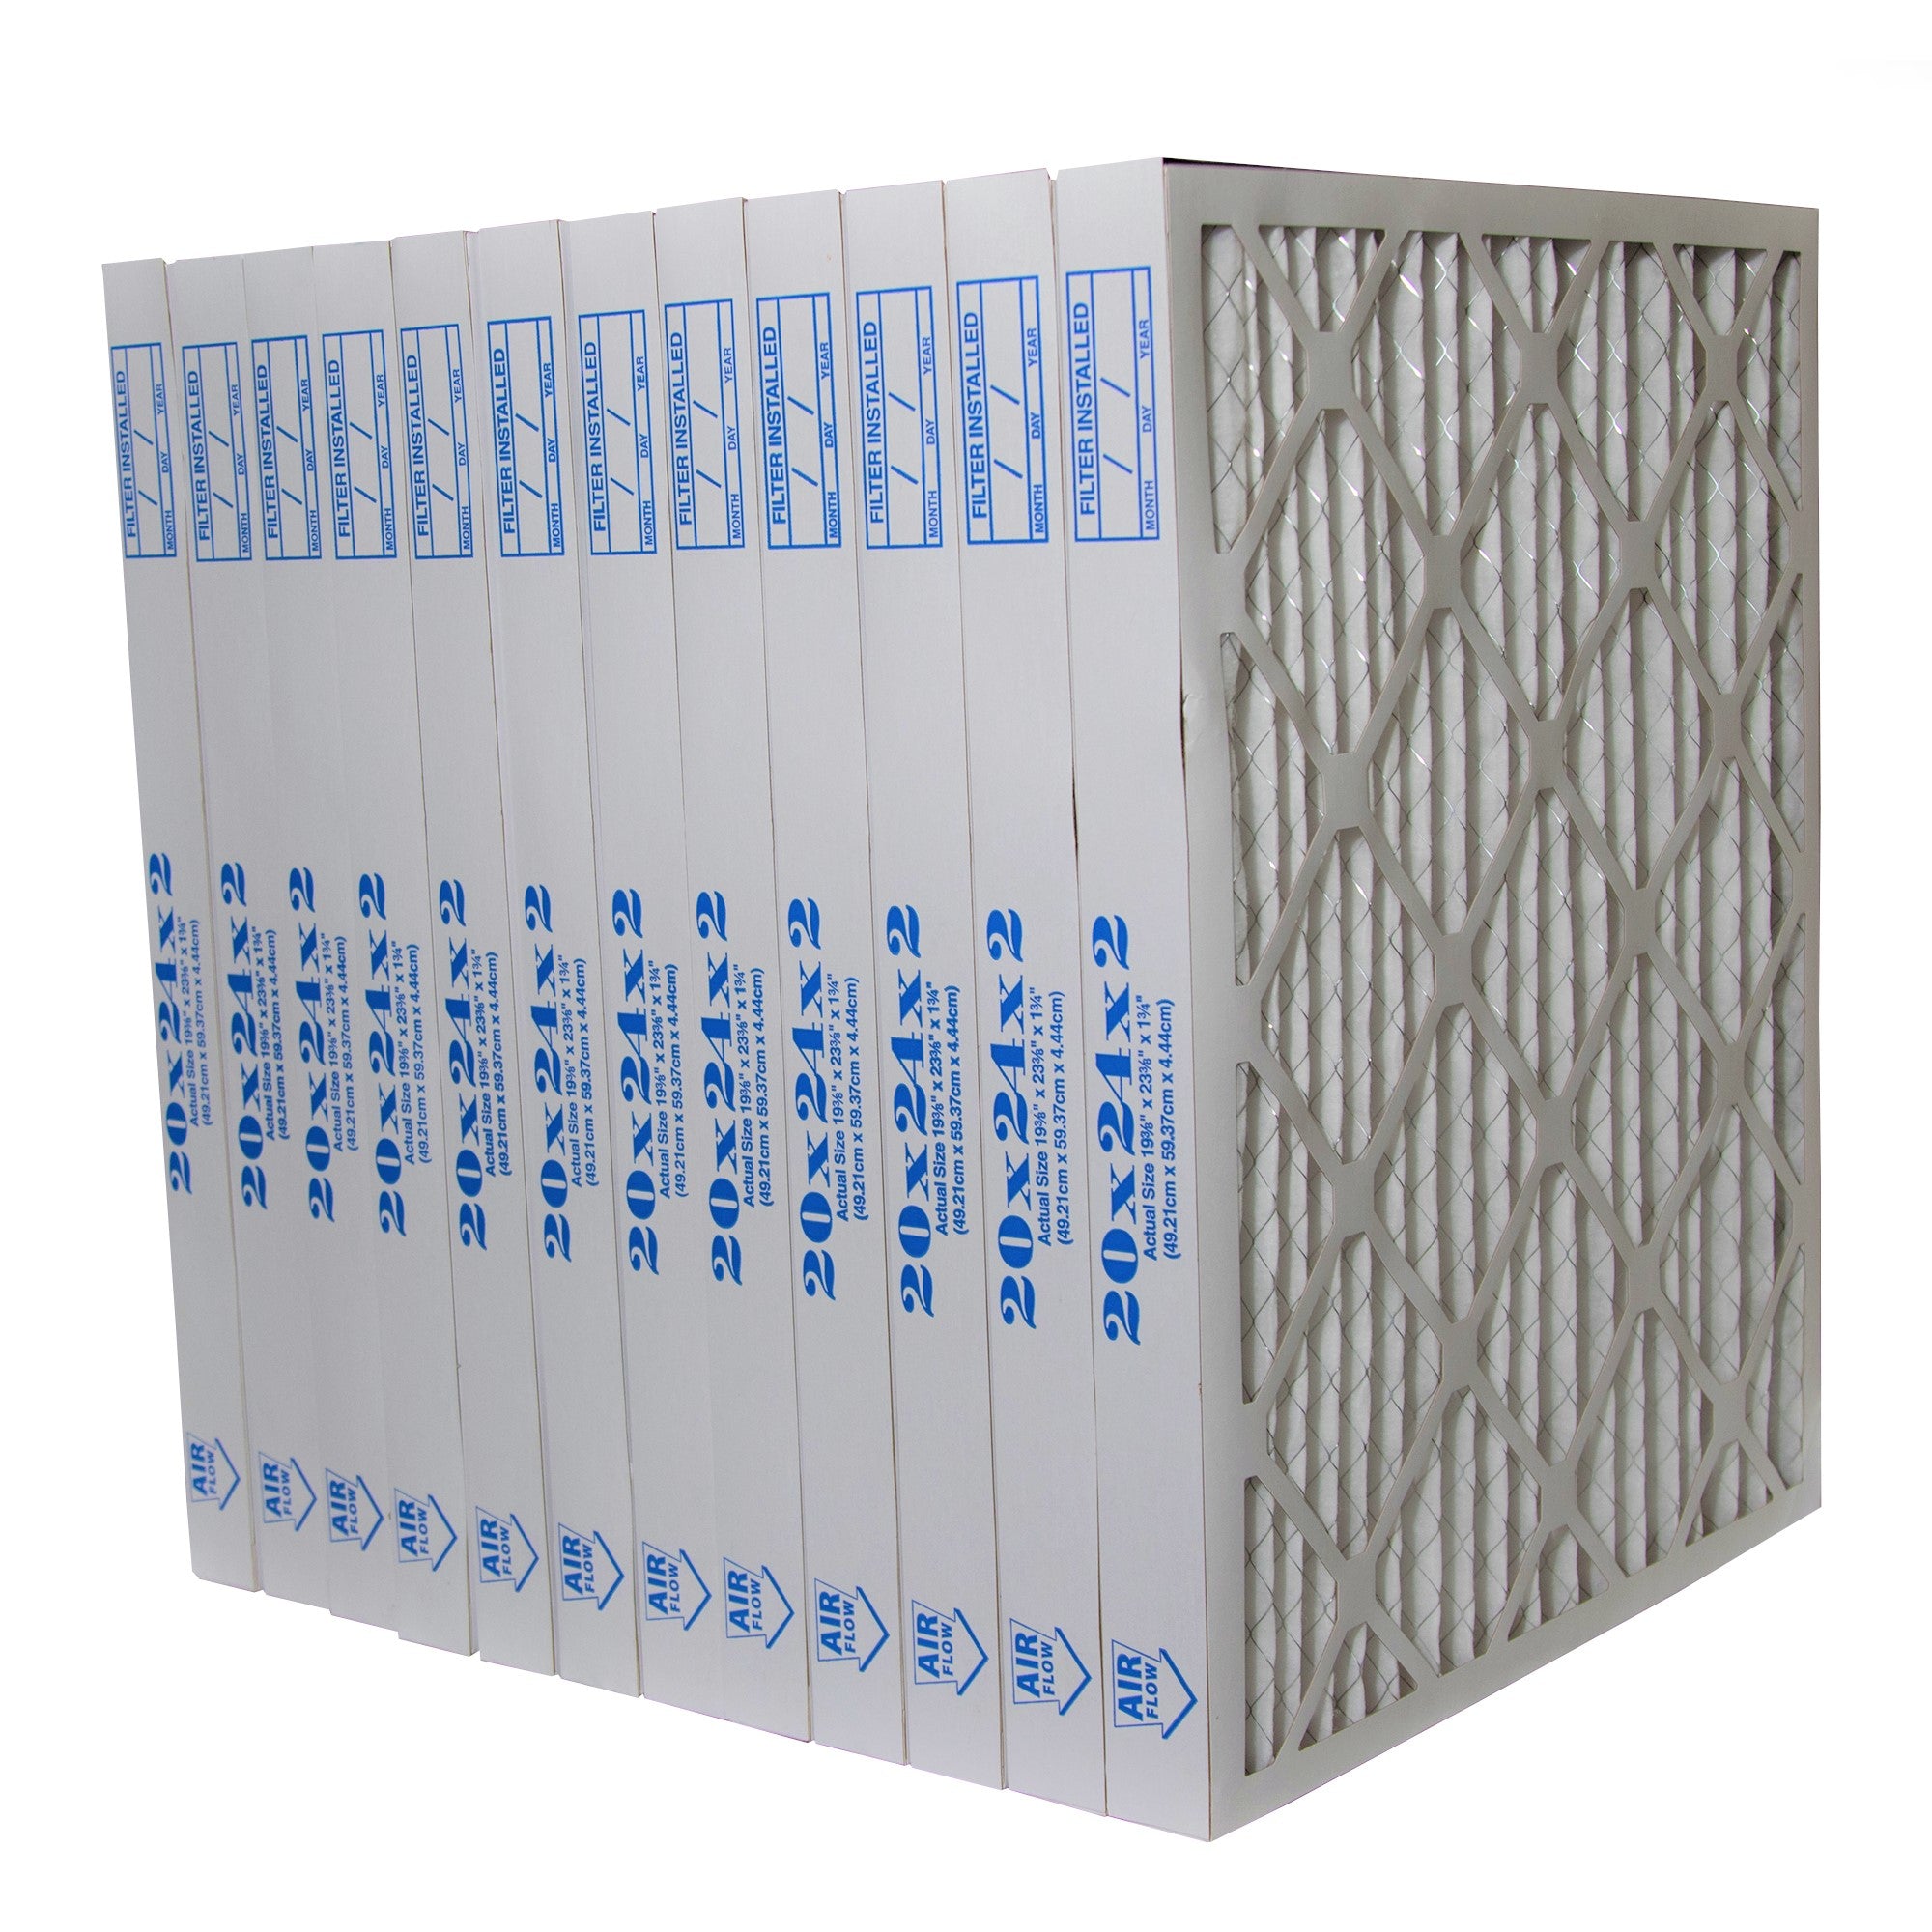 20x24x2 Furnace Filter MERV 8 Pleated Filters. Case of 12